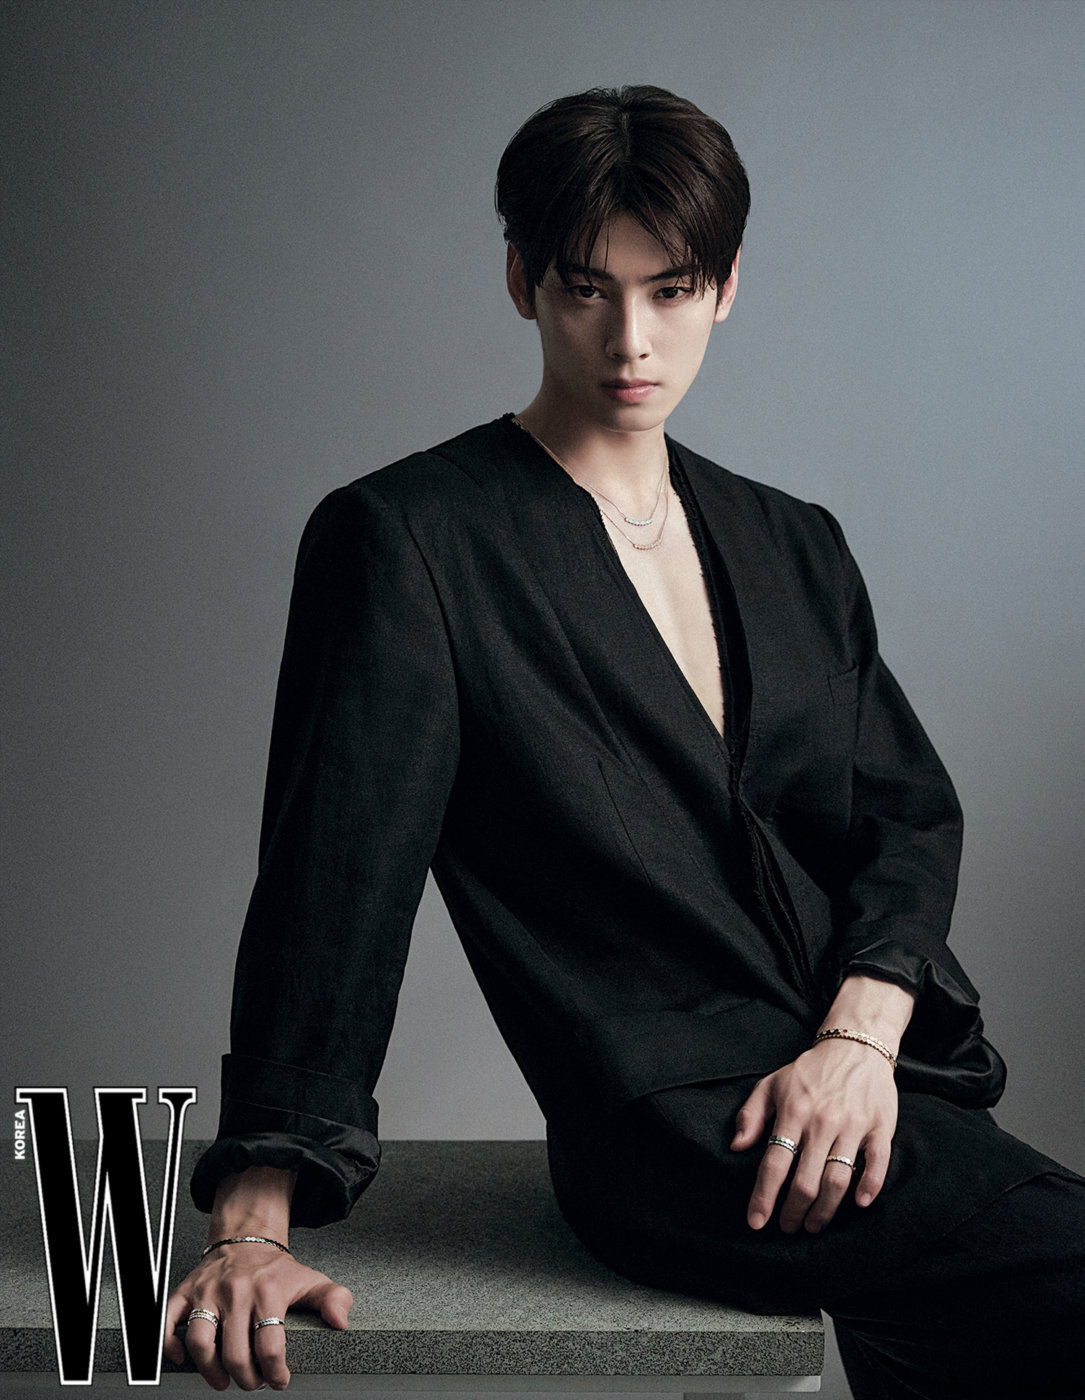 ASTRO's Cha Eunwoo Gains Attention For Looking Unreal At Recent Chaumet  Event - Koreaboo